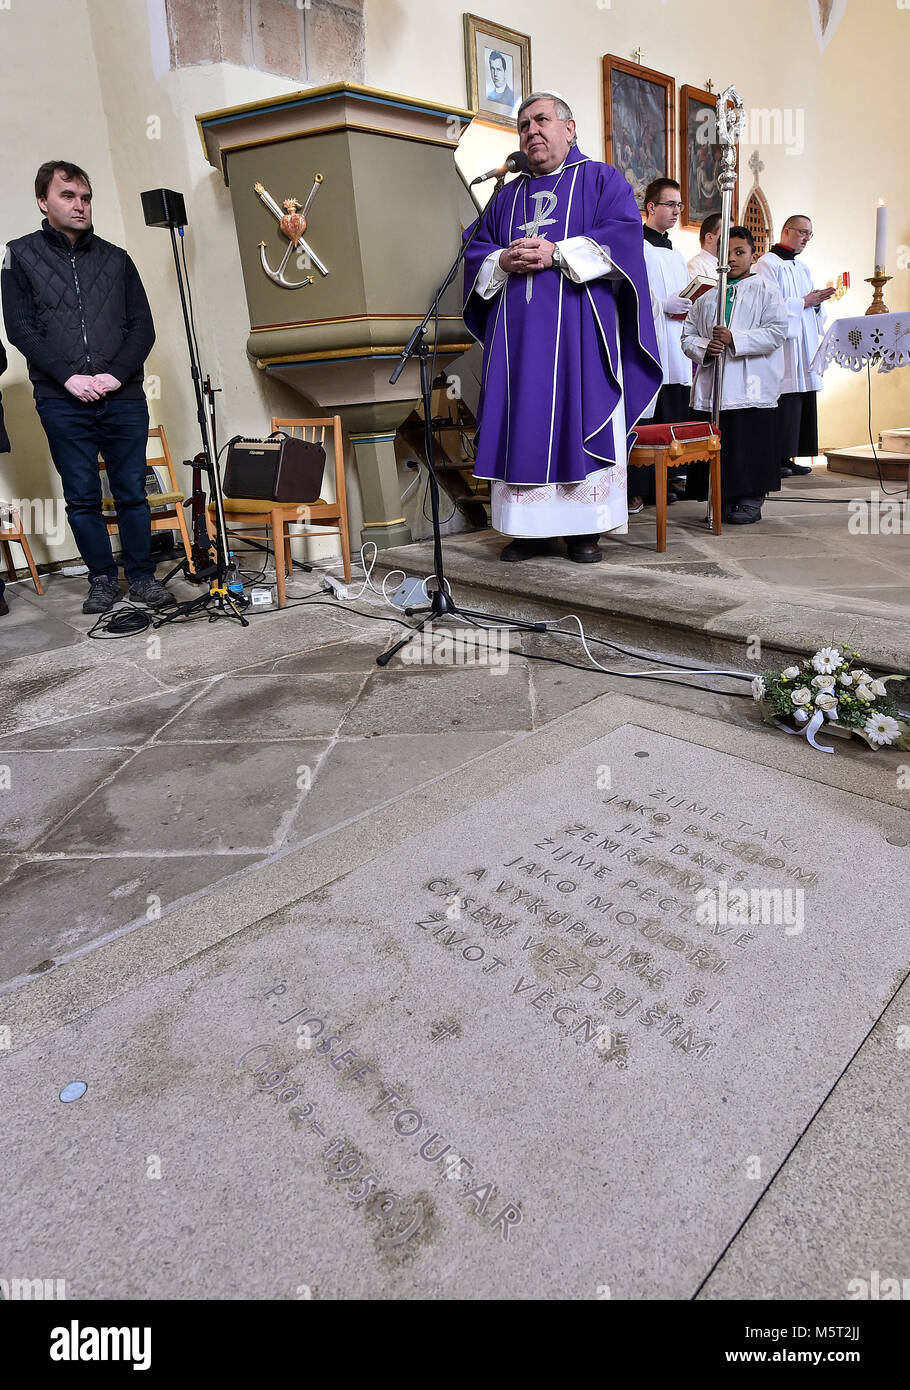 More than 100 pilgrims commemorated Czech Catholic priest Josef Toufar (1902-1950), who was killed by the communist secret police (StB), in the Church of the Assumption of the Blessed Virgin Mary in Cihost, Czech Republic, February 25, 2018. The event started with a concert, followed by a mass celebrated by Premonstratensian Monastery abbot Marian Rudolf Kosik. Toufar, who served in Cihost, was investigated by the StB in connection with the 'Cihost miracle' in December 1949 when a cross standing on the main altar of the local church moved several times during his sermon. The communist regime u Stock Photo